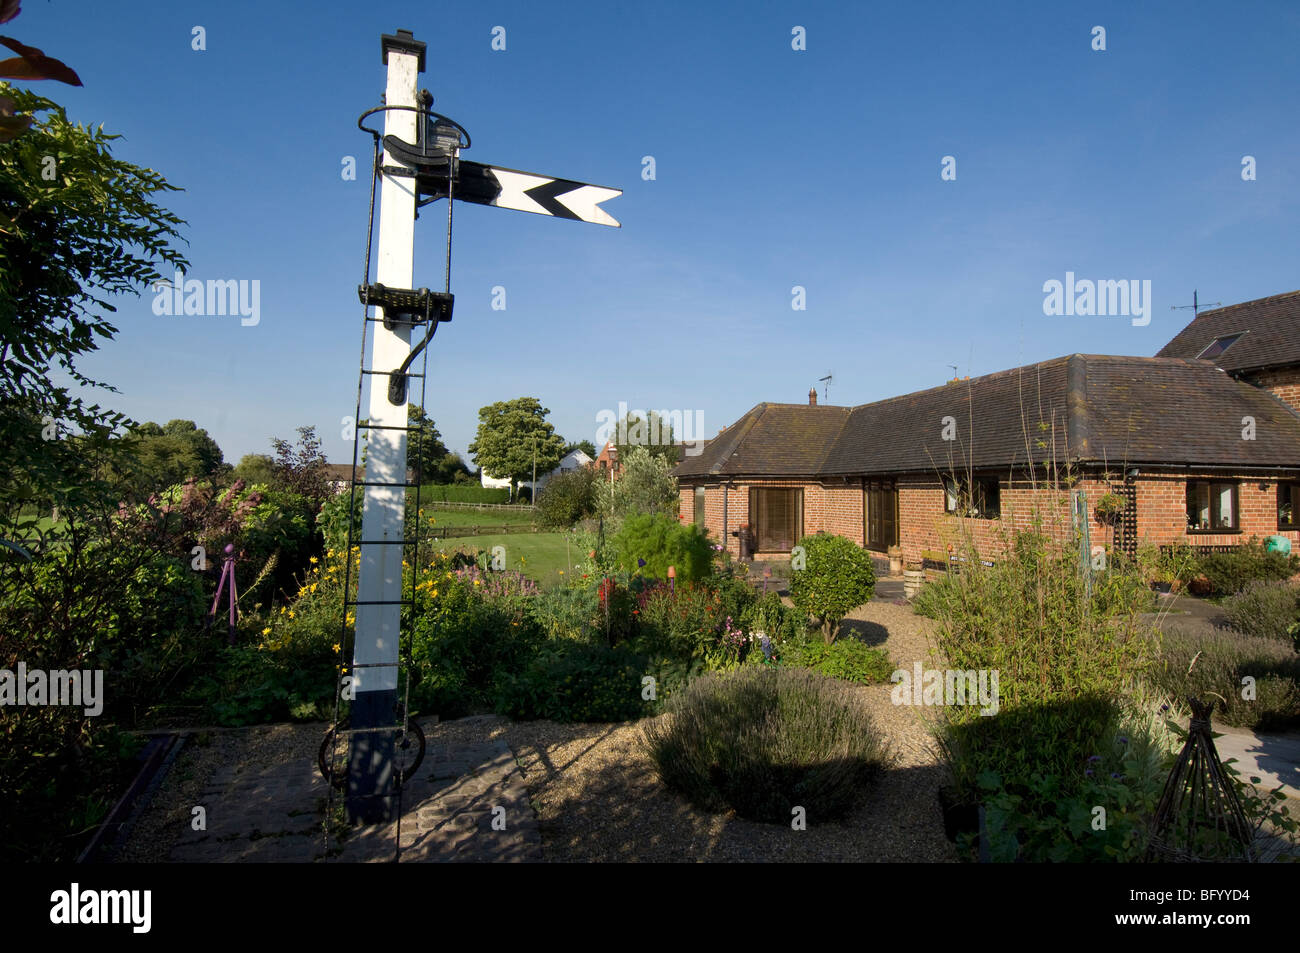 A preserved railway signal in a rail enthusiast's garden, part of a collection of railwayana. Stock Photo